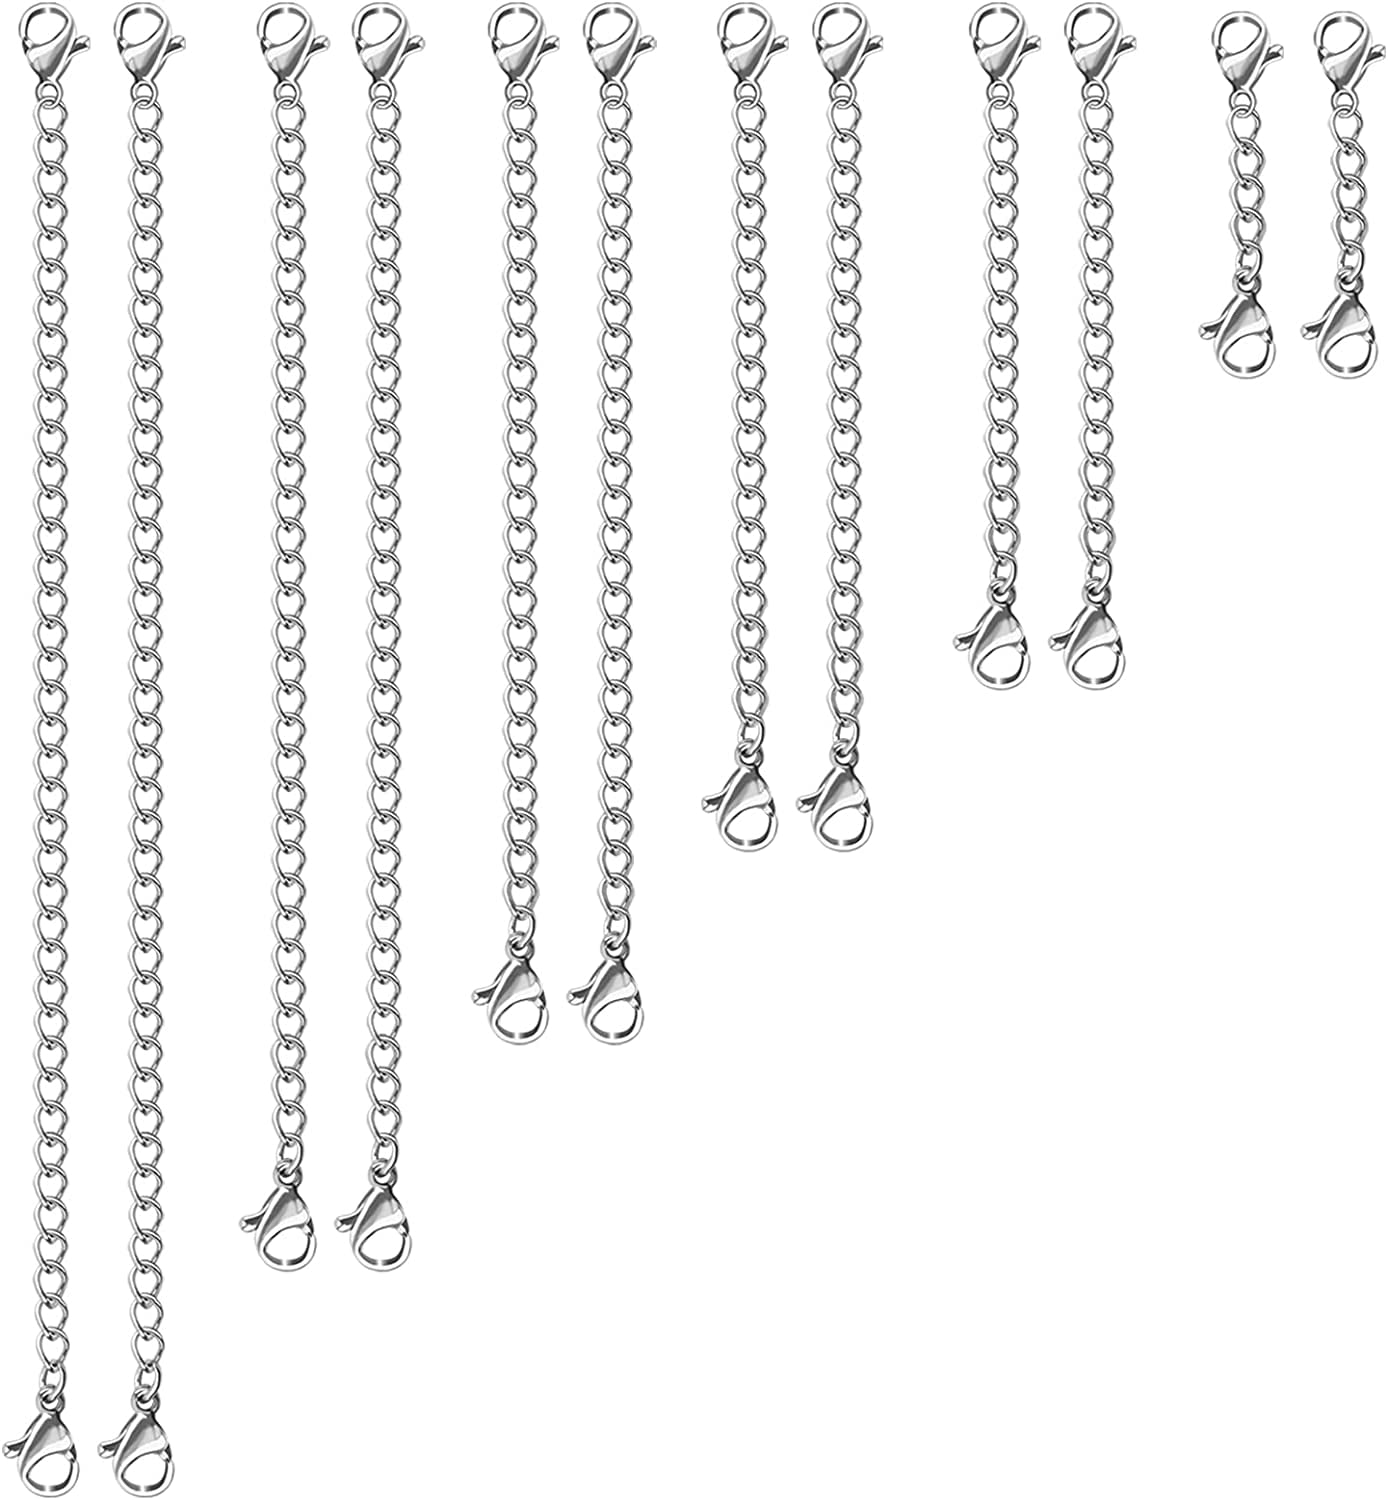 UUBAAR Necklace Extender, 18 Pcs Chain Extenders for Necklaces, Premium Stainless Steel Jewelry Bracelet Anklet Necklace Extenders (6 G, Stainless